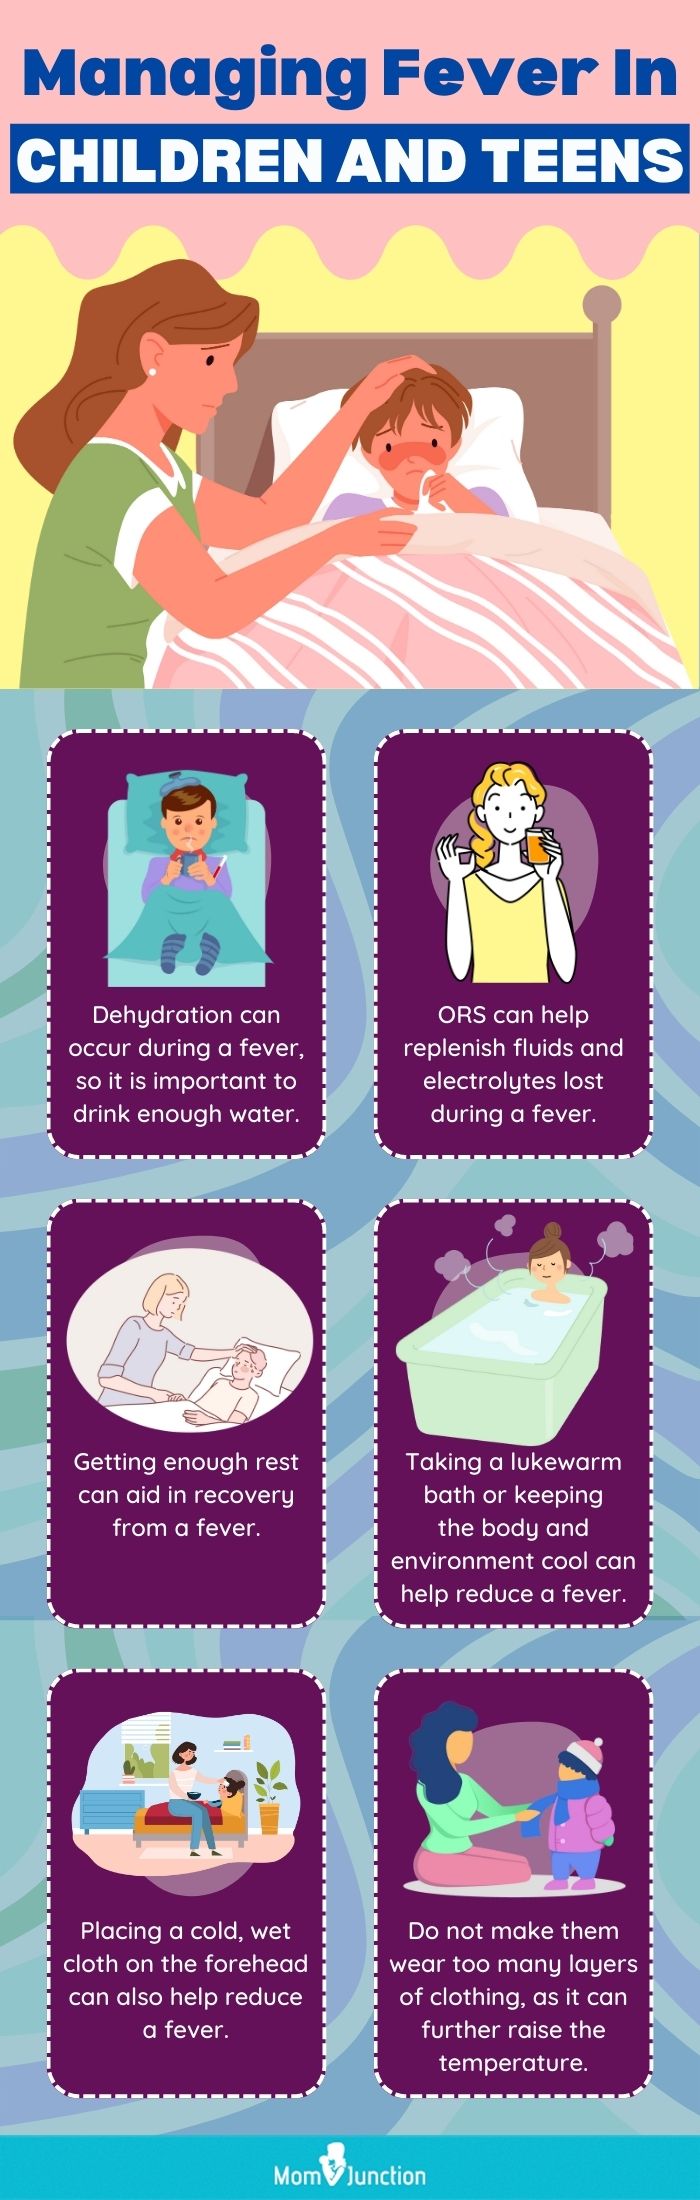 managing fever in children and teens (infographic)